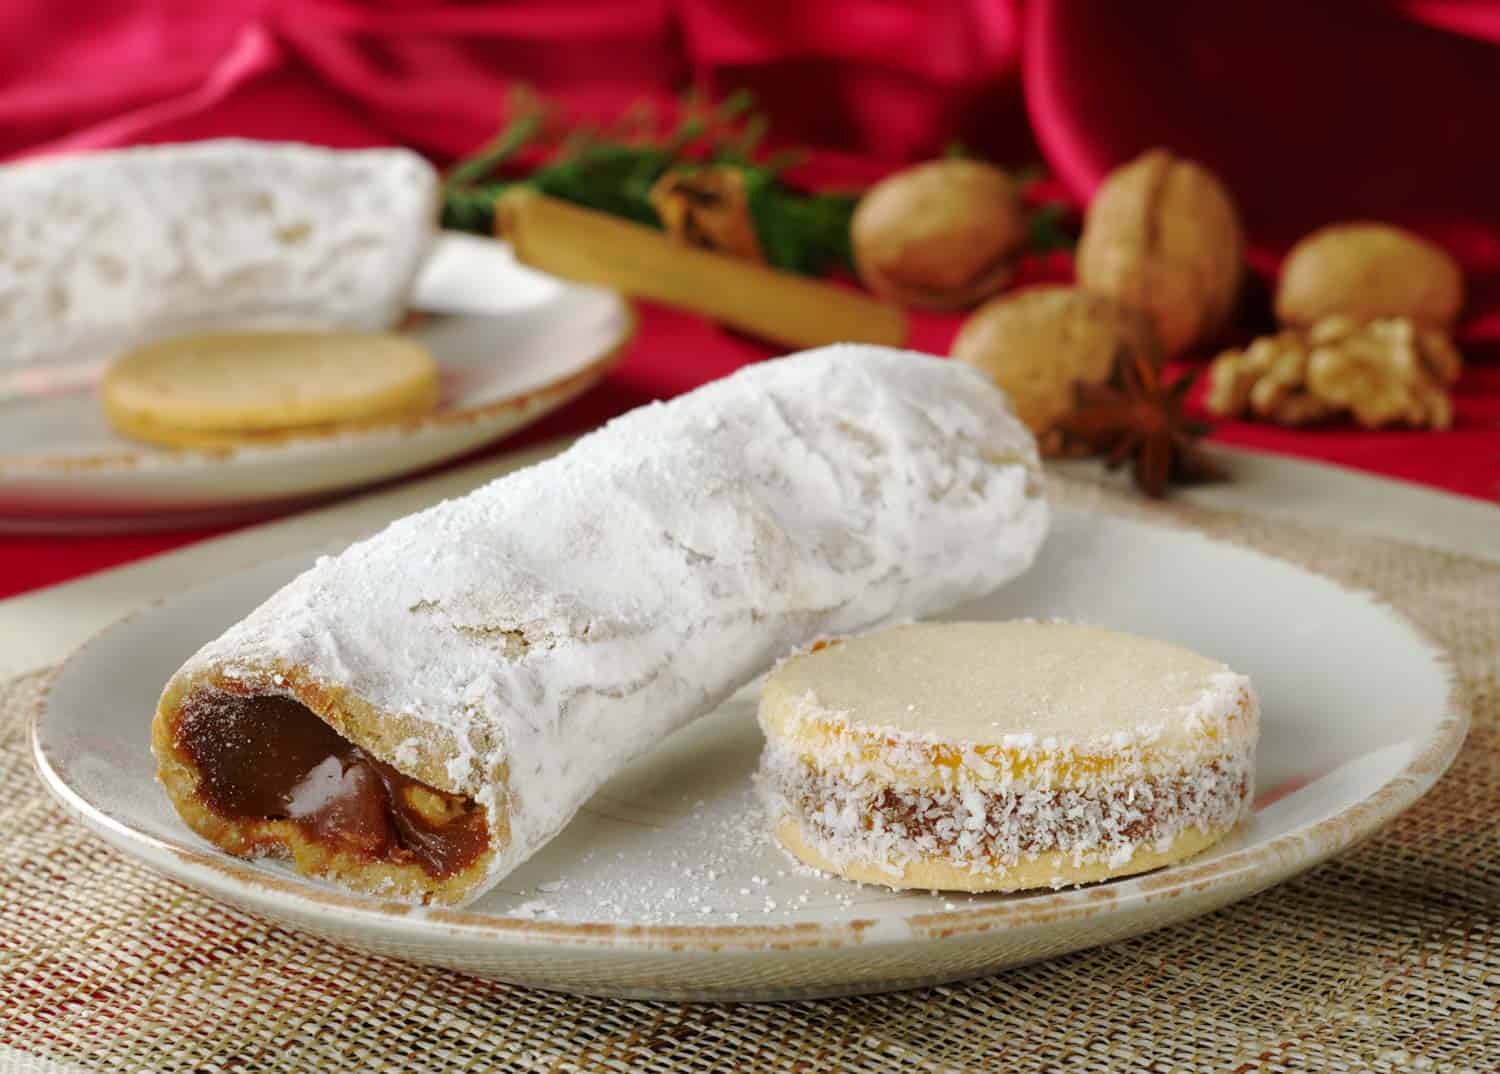 Desserts cakes filled with a caramel-like cream called "manjar": the long one is called "Guarguero" the round one is called "Alfajor"